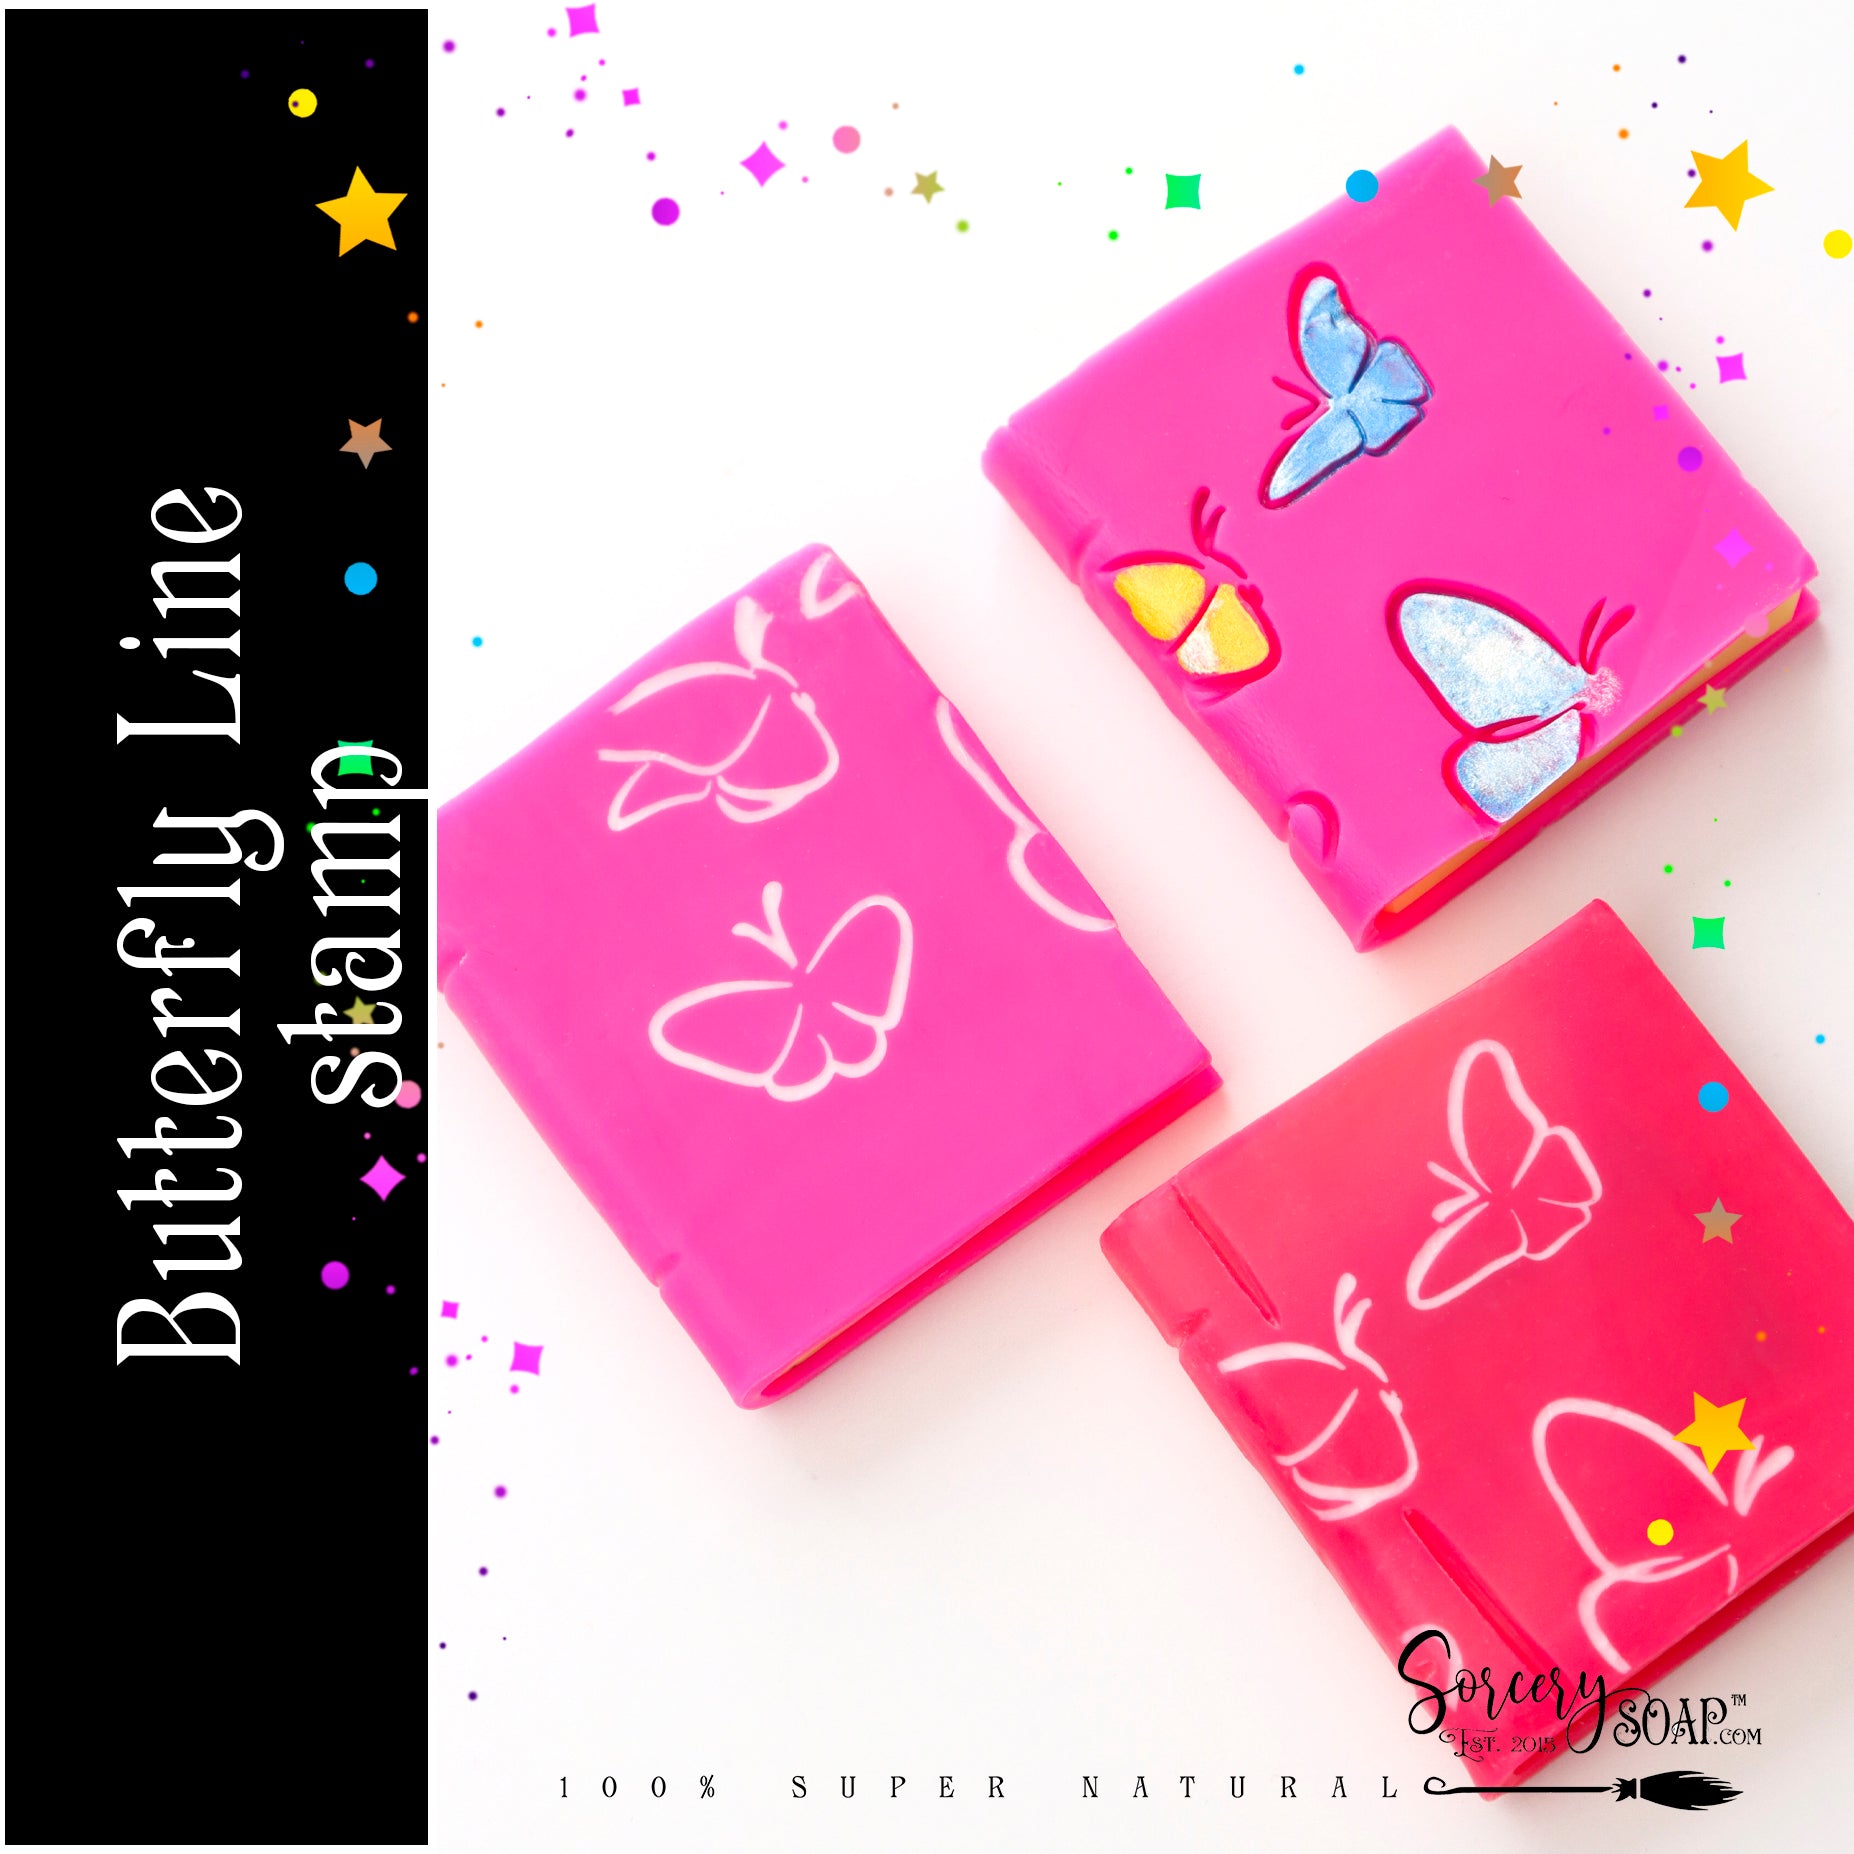 Butterfly Line Soap Stamp